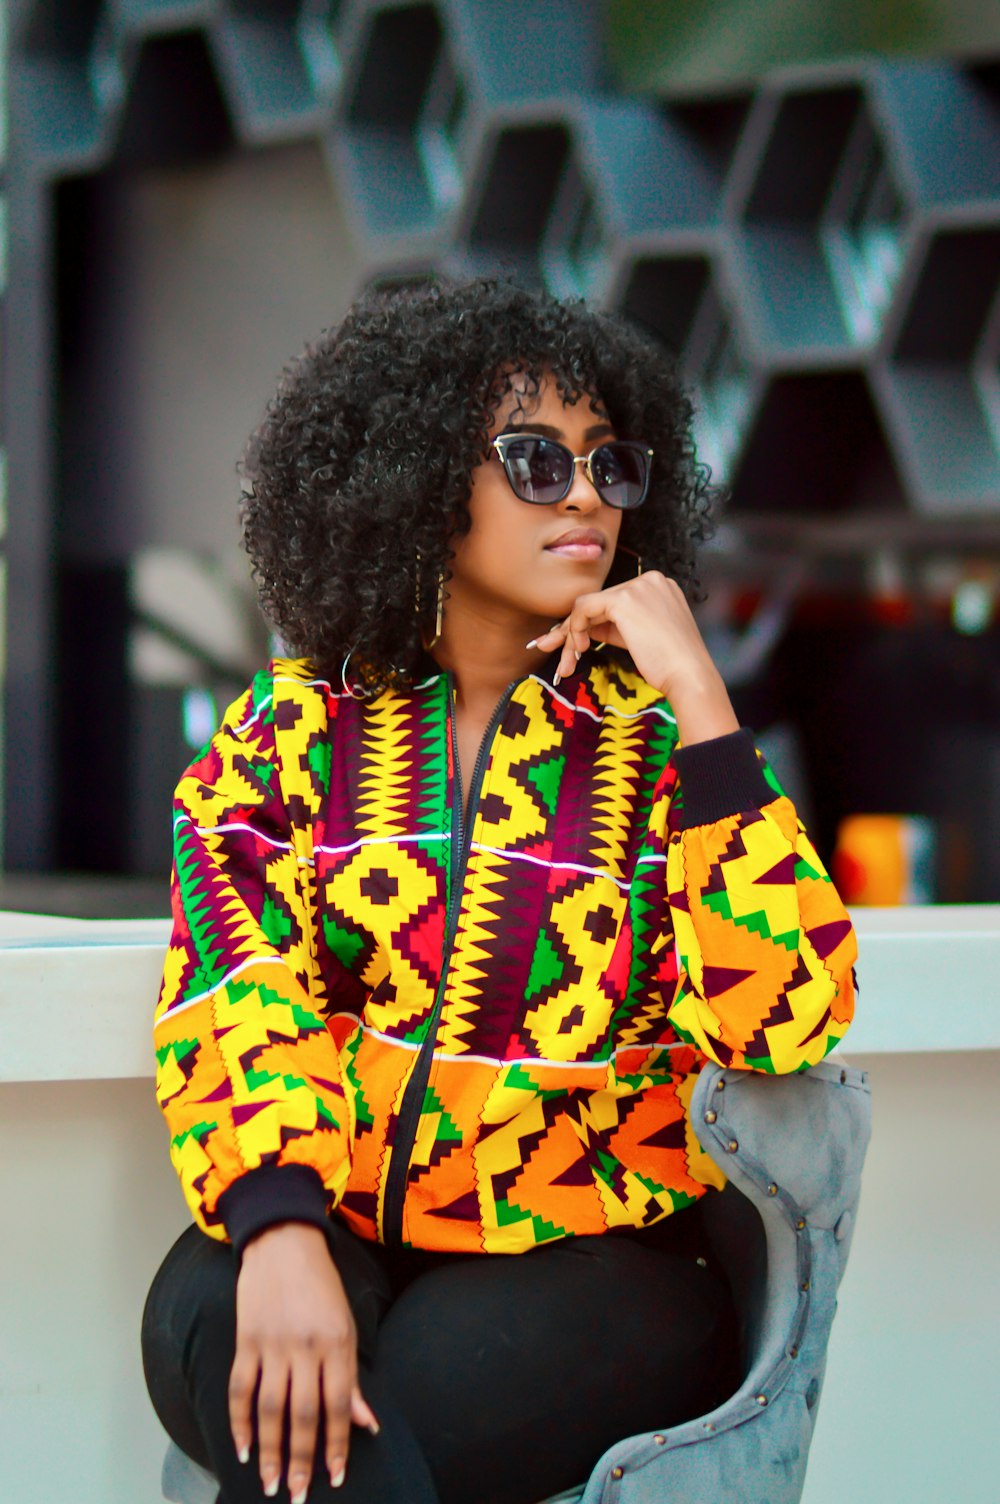 woman in yellow and black jacket wearing sunglasses